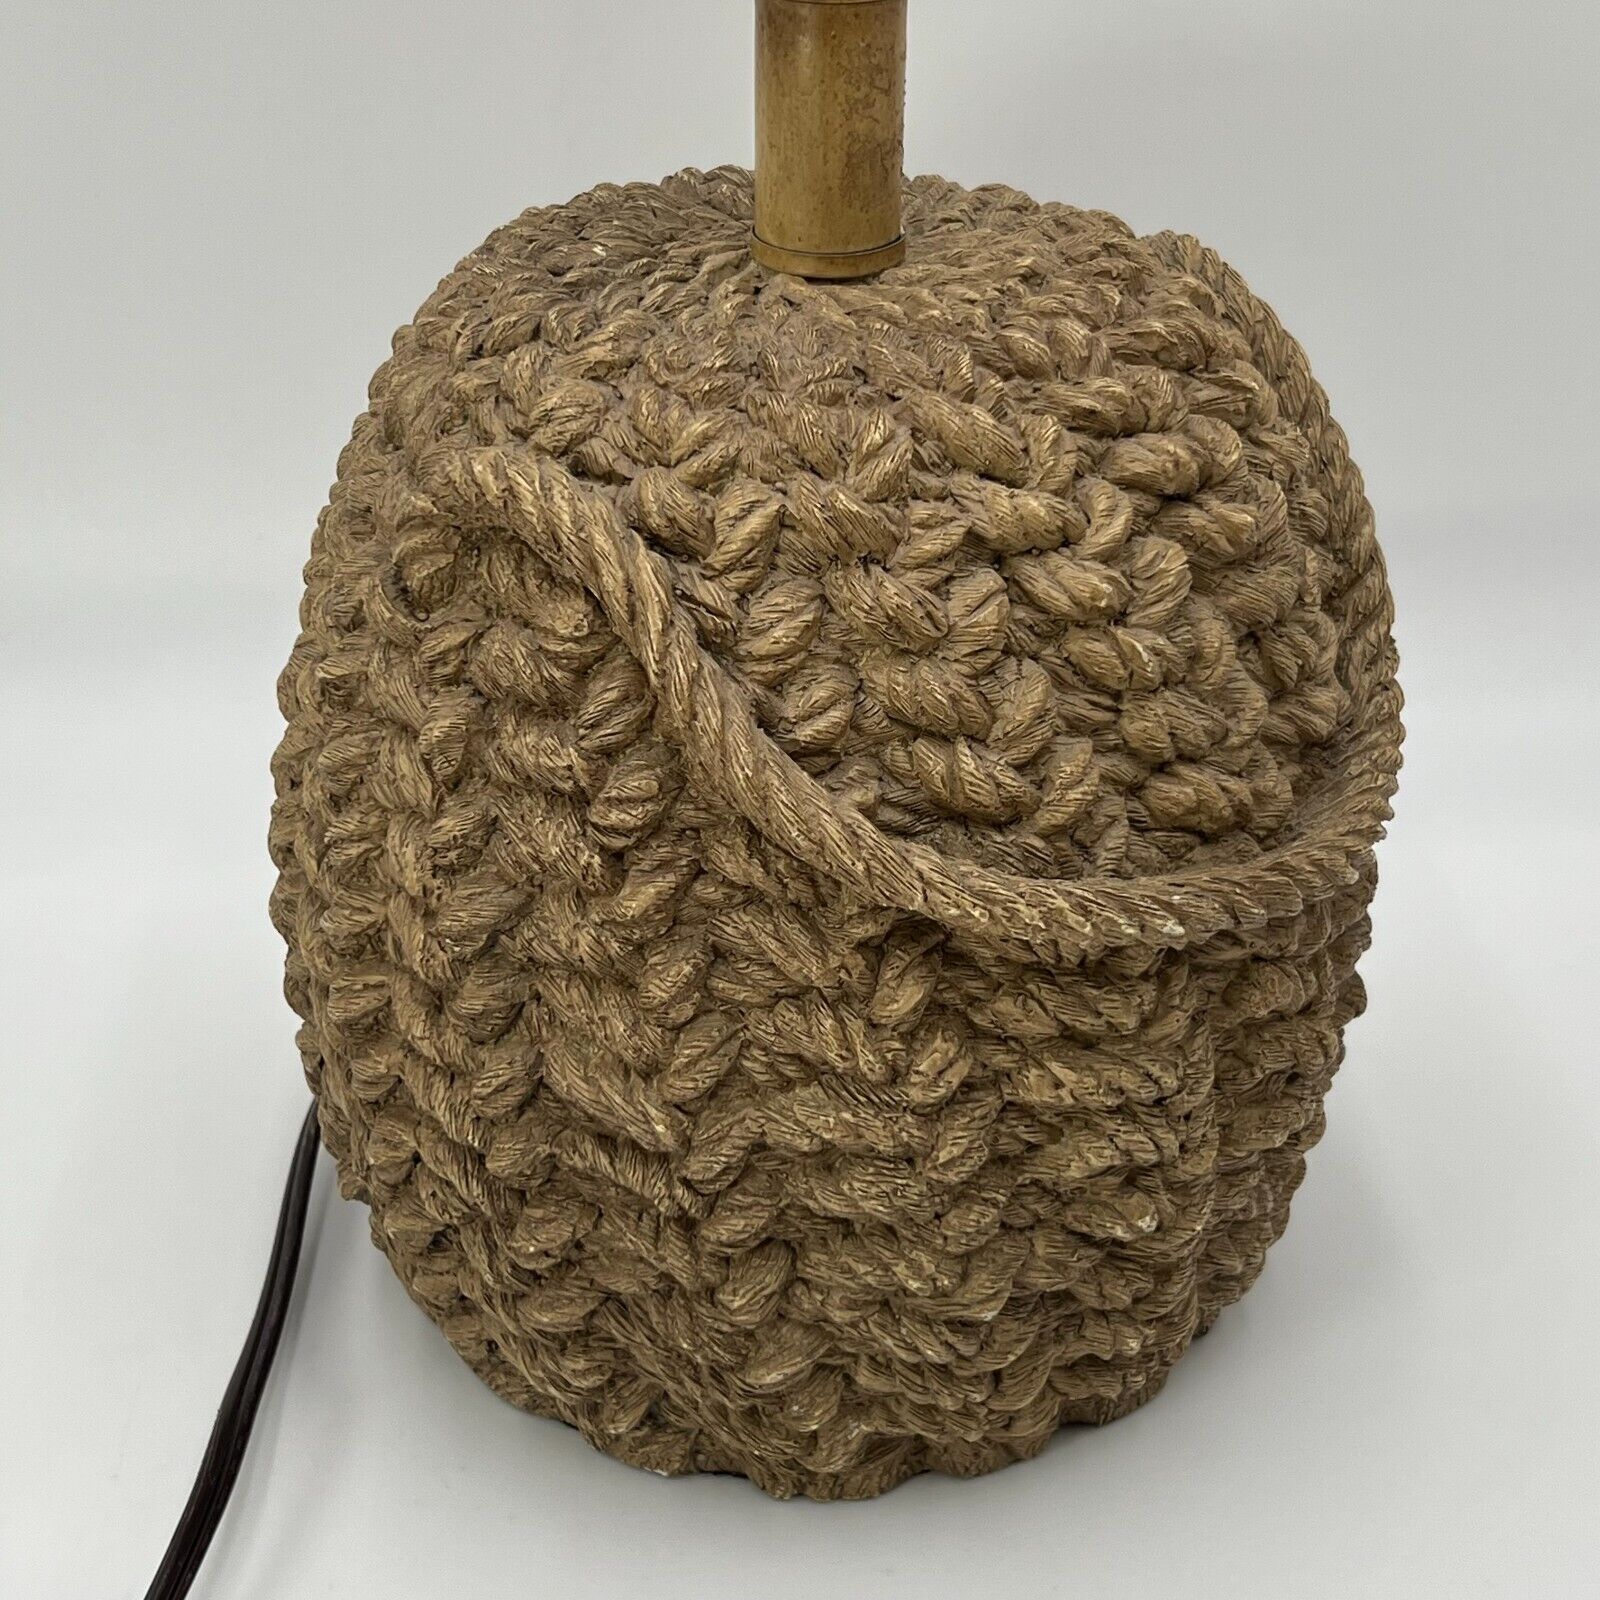 Vintage Rope Knot Design Carved Wood Plug in Lamp Tested Works No Shade 19”